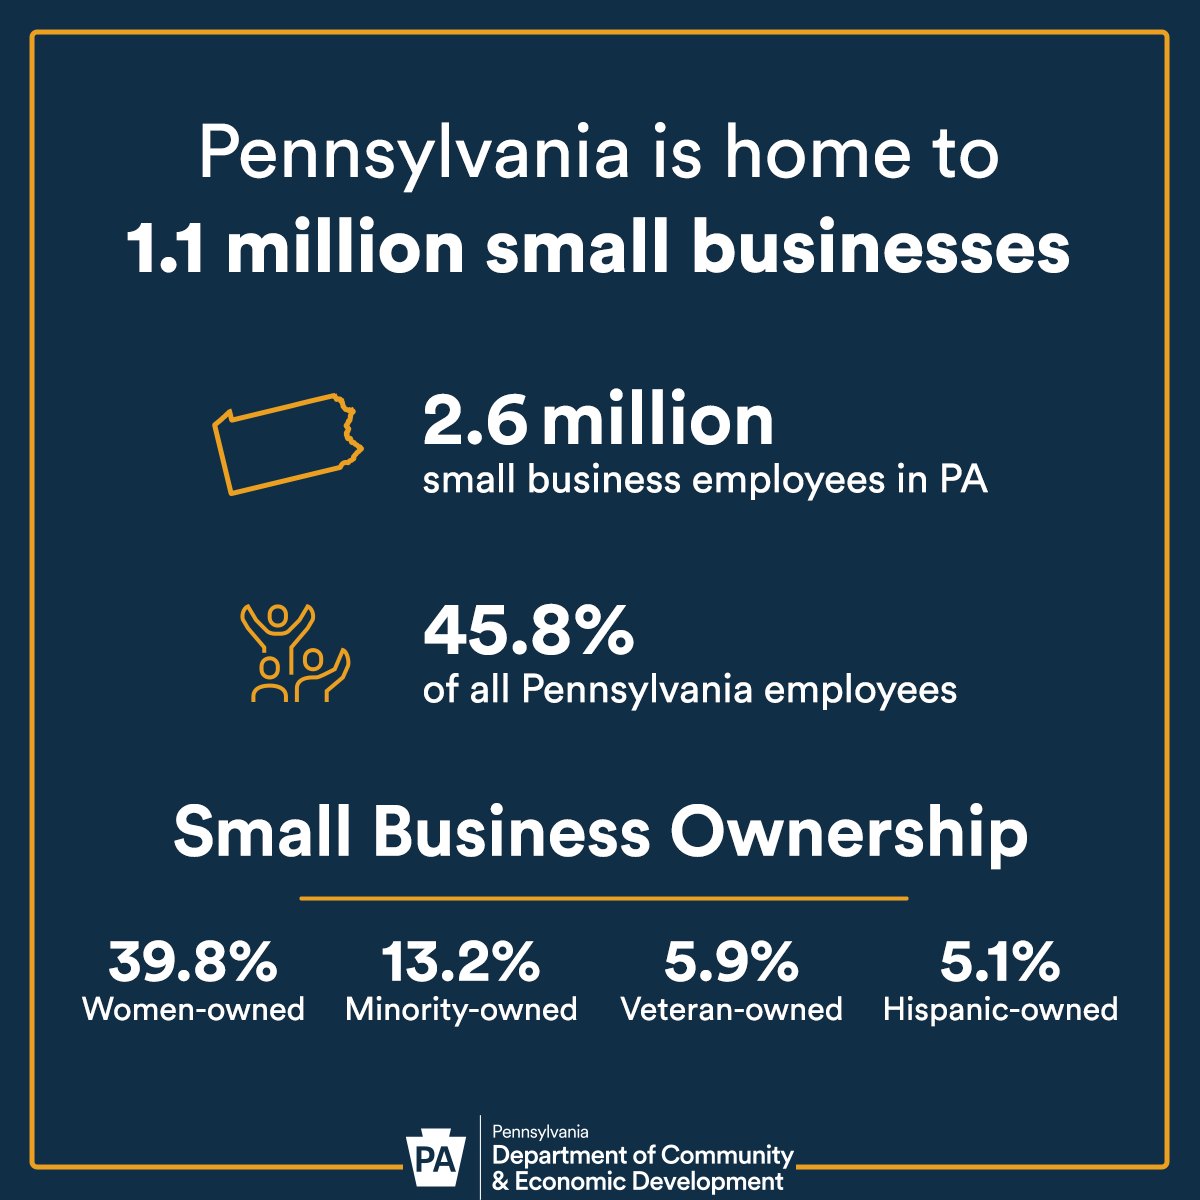 We’re always proud of the 1.1 million small businesses who call the Keystone State home and hope you thrive in PA for years to come. 

Celebrate Pennsylvania Small Business Week - sbdc.duq.edu/PA-Small-Busin…

#PASmallBiz24 #dusbdc #pasbdc #smallbusiness